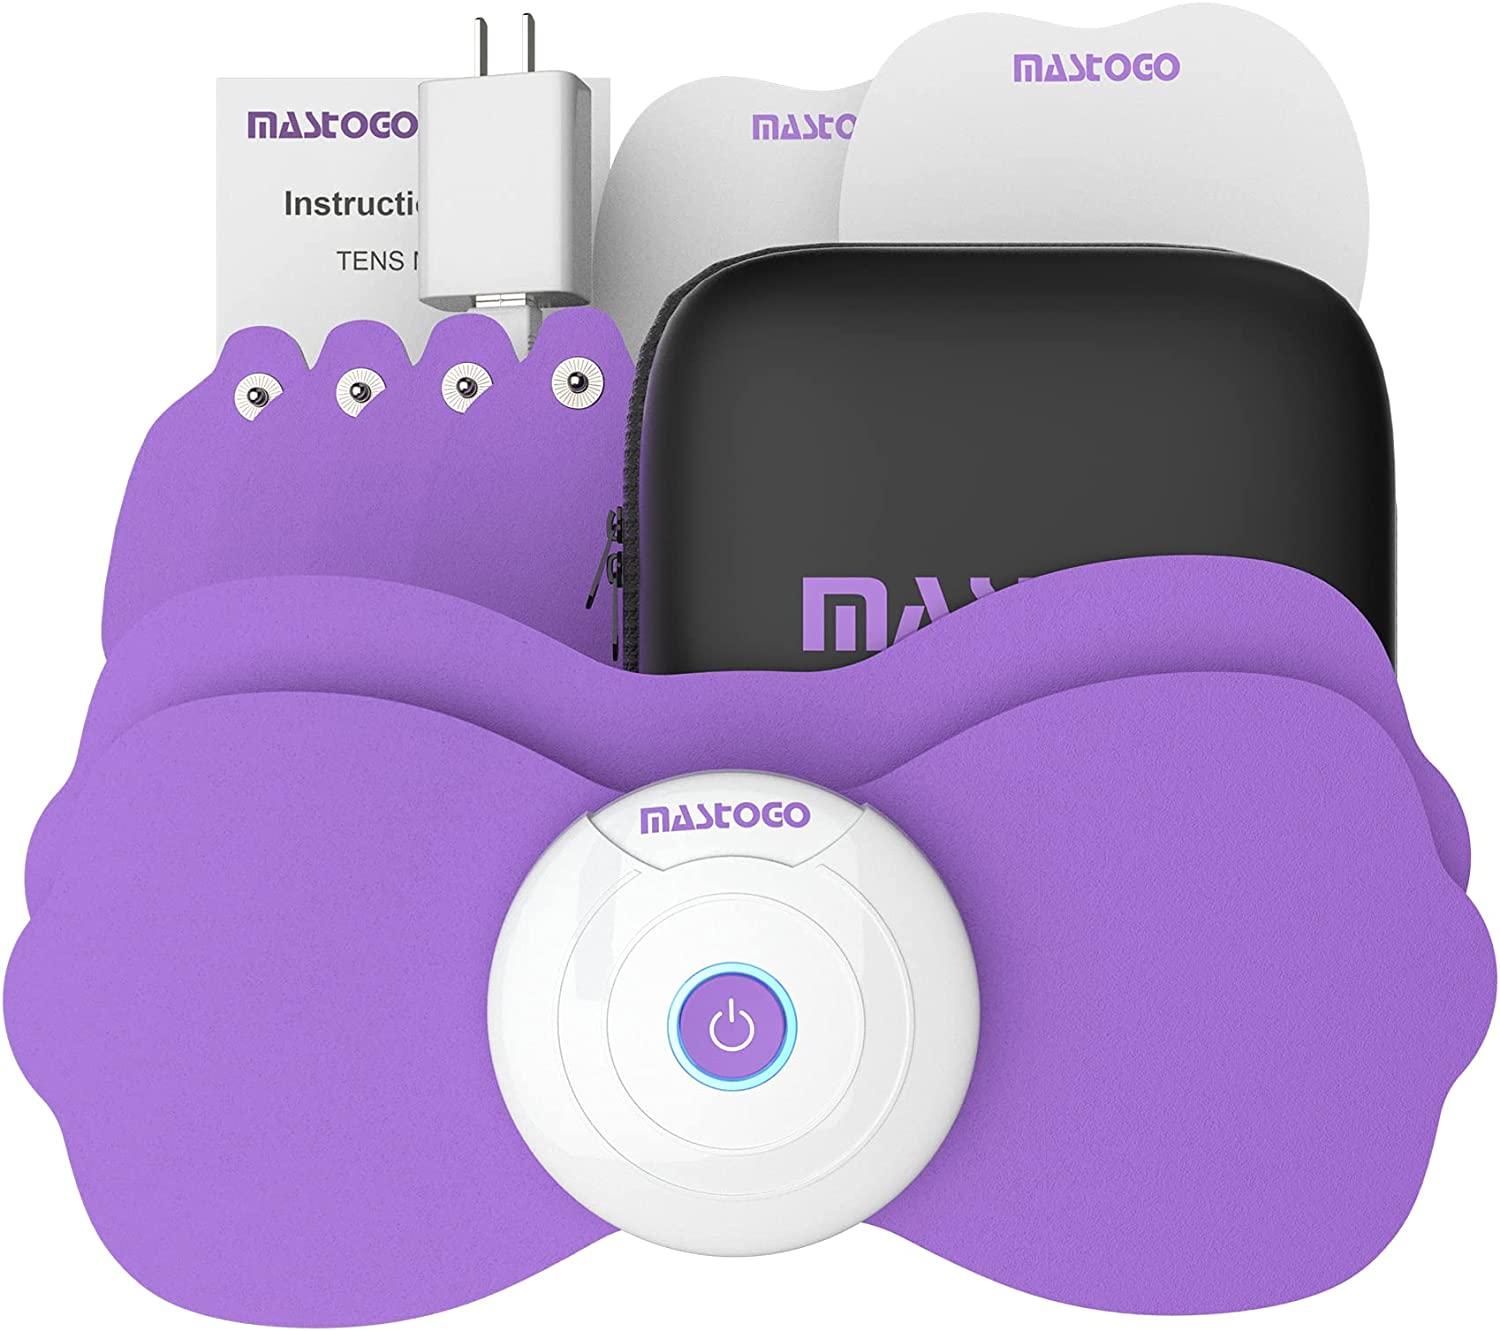 MASTOGO Wireless TENS & EMS Unit Back Pain Relief Massager - APP Controlled  Bluetooth EMS Muscle Stimulator Machine for Back Shoulder Leg Neck Pain  Relief